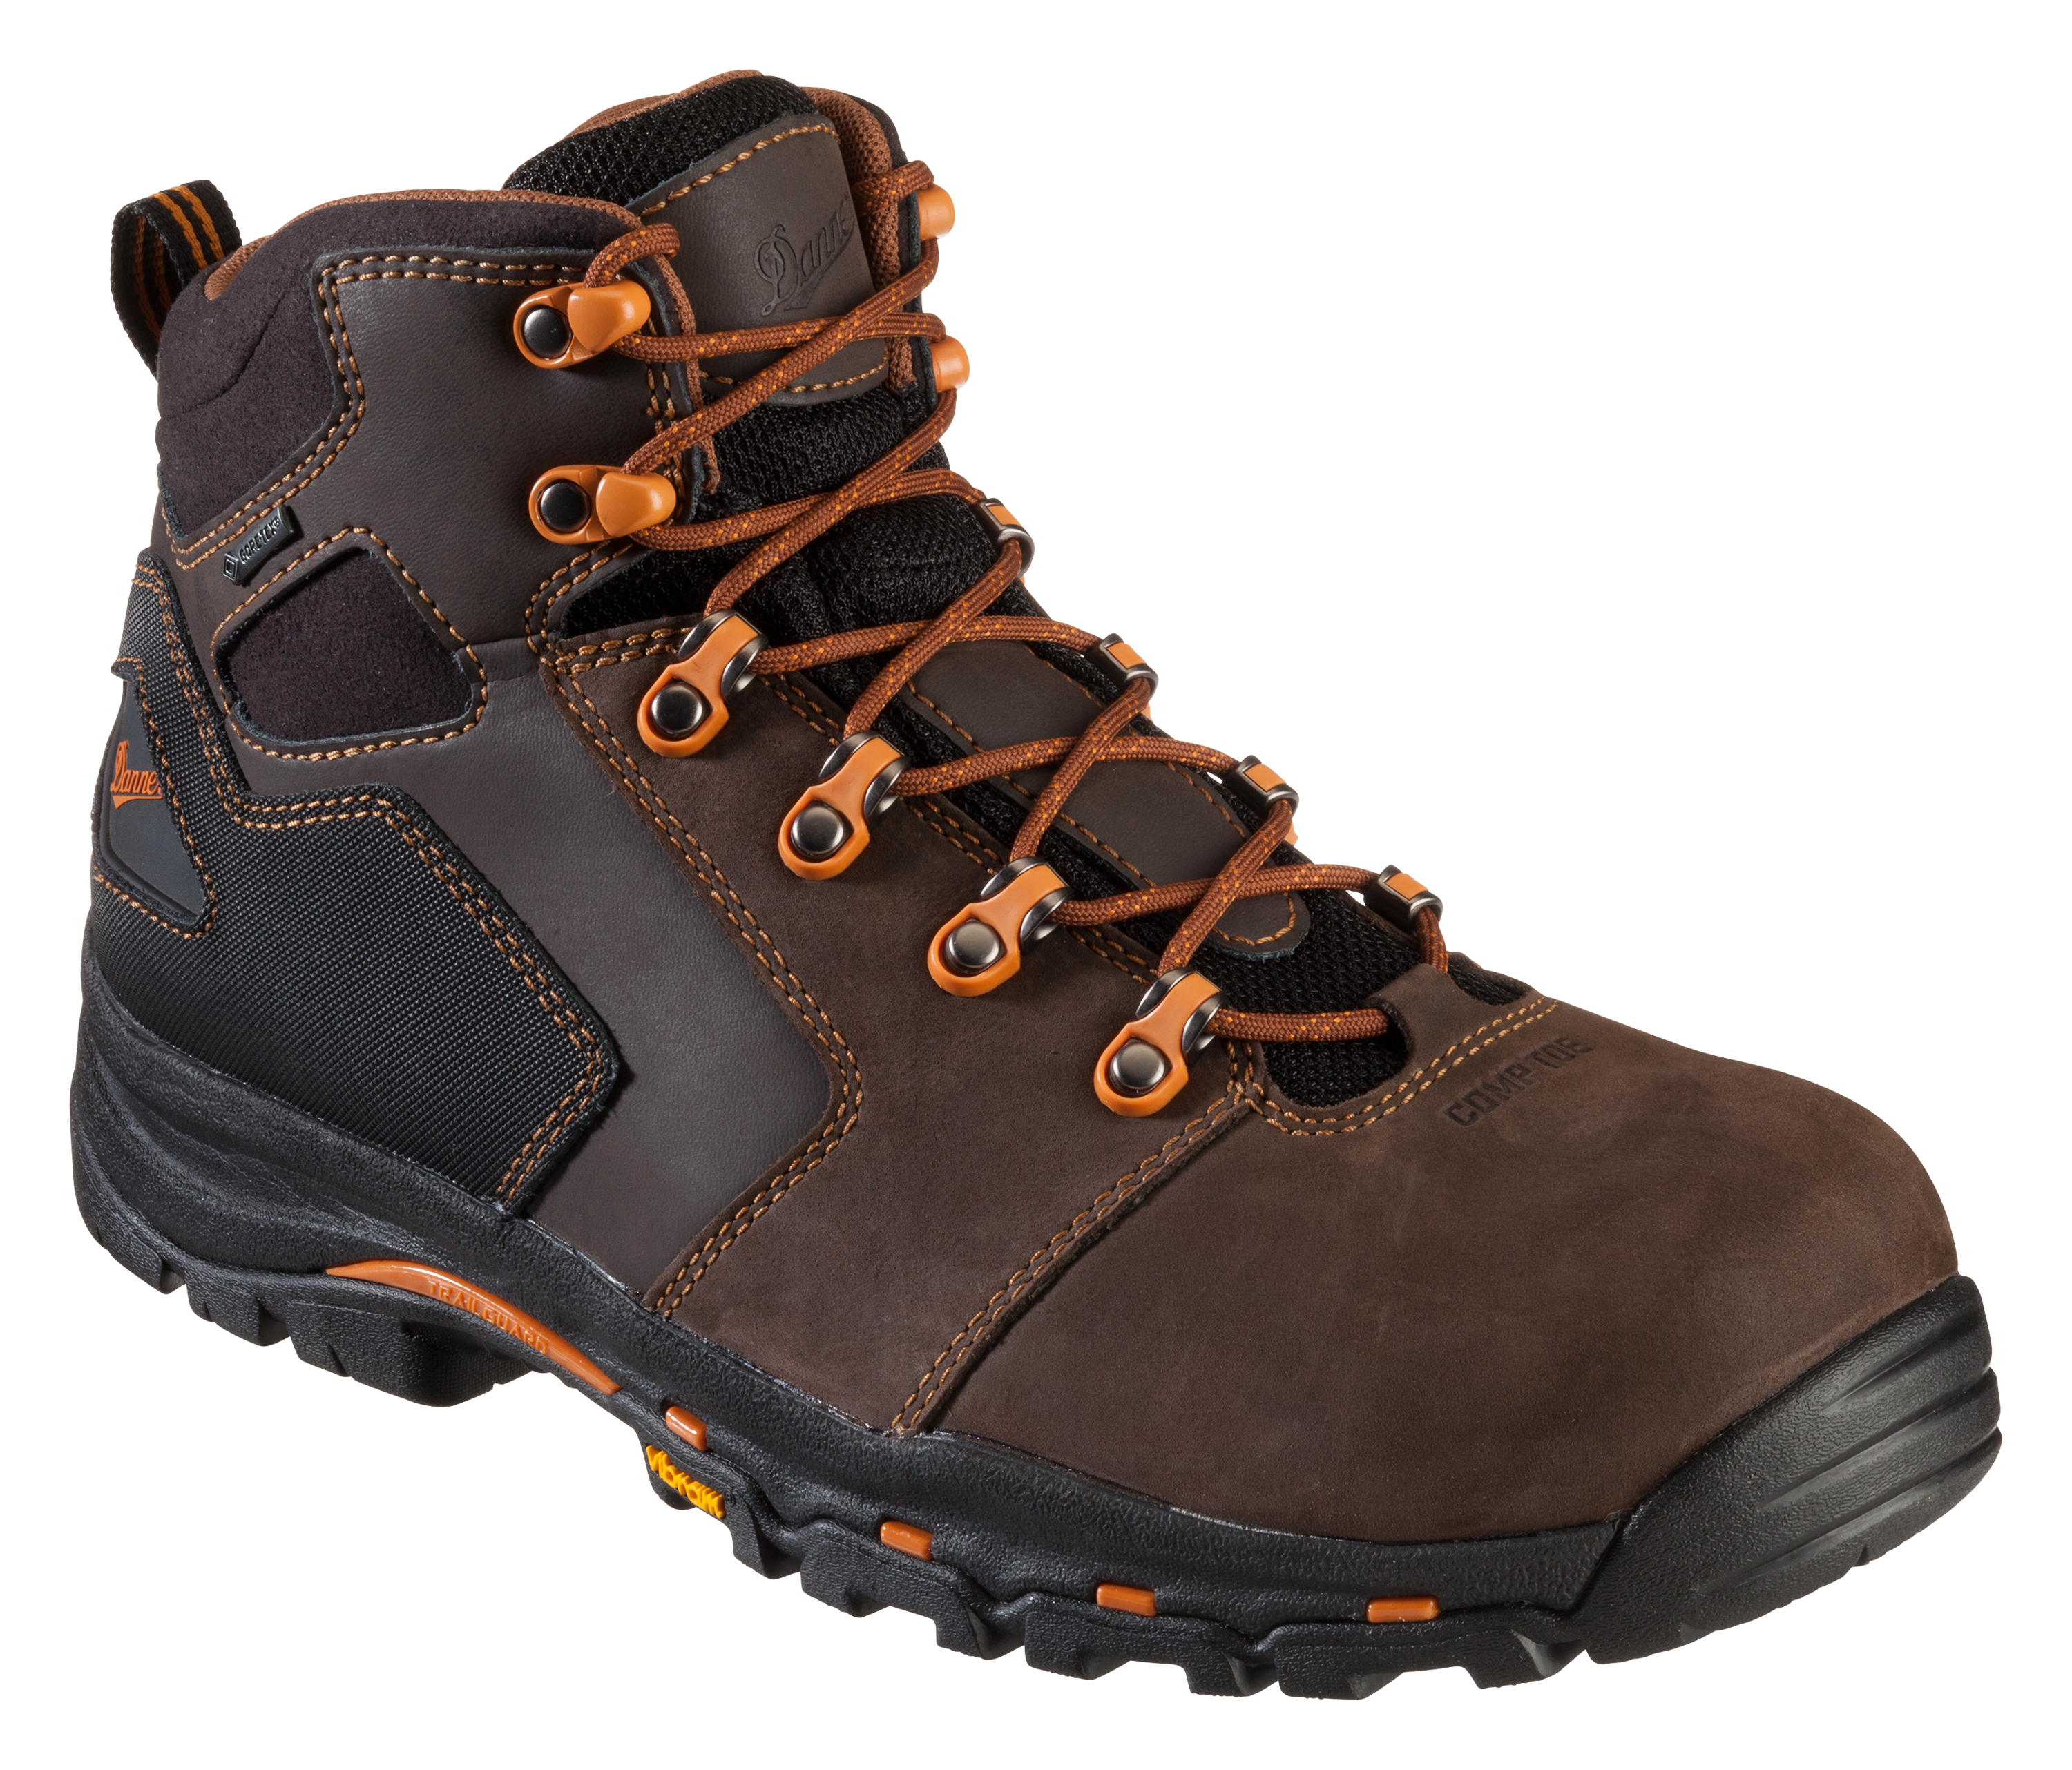 Danner Vicious GORE-TEX Non-Metallic Safety Toe Work Boots for Men - Brown - 11.5W